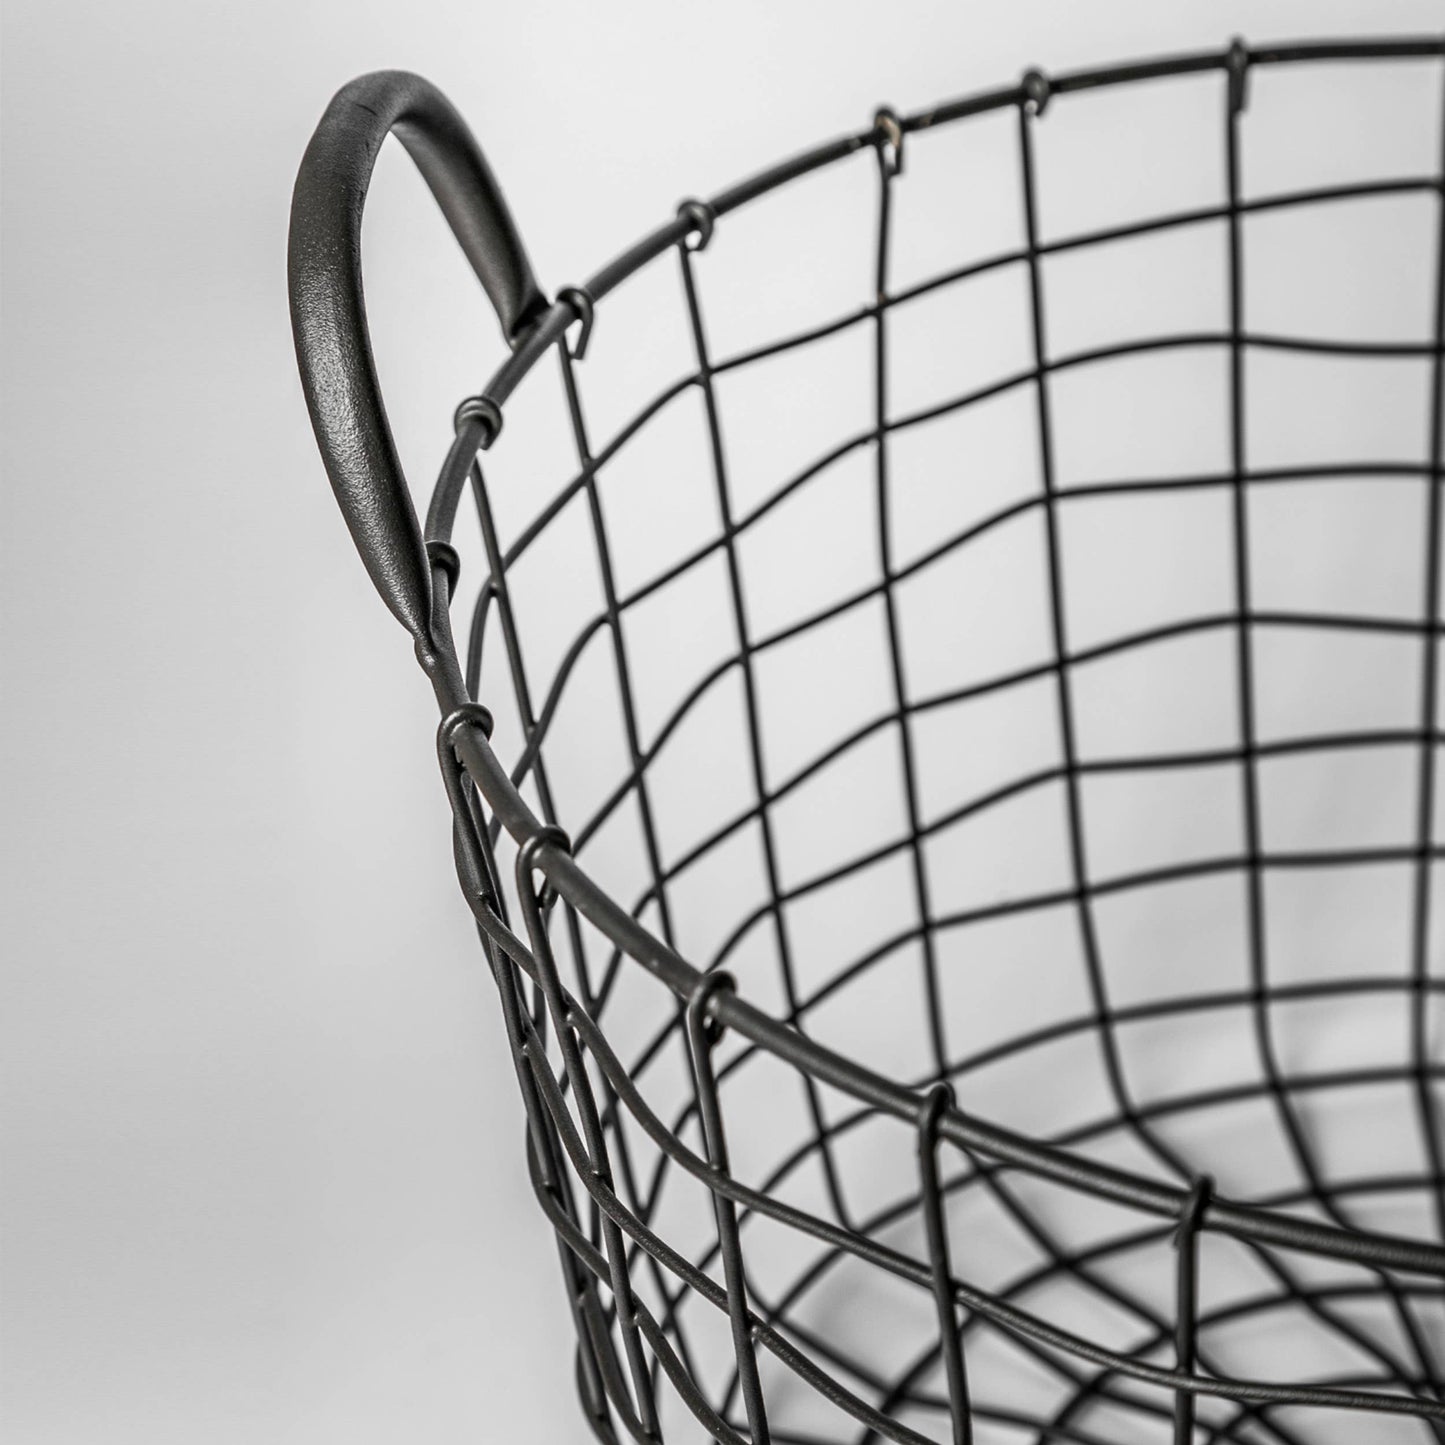 303 - Round Iron Basket with handles: Default title